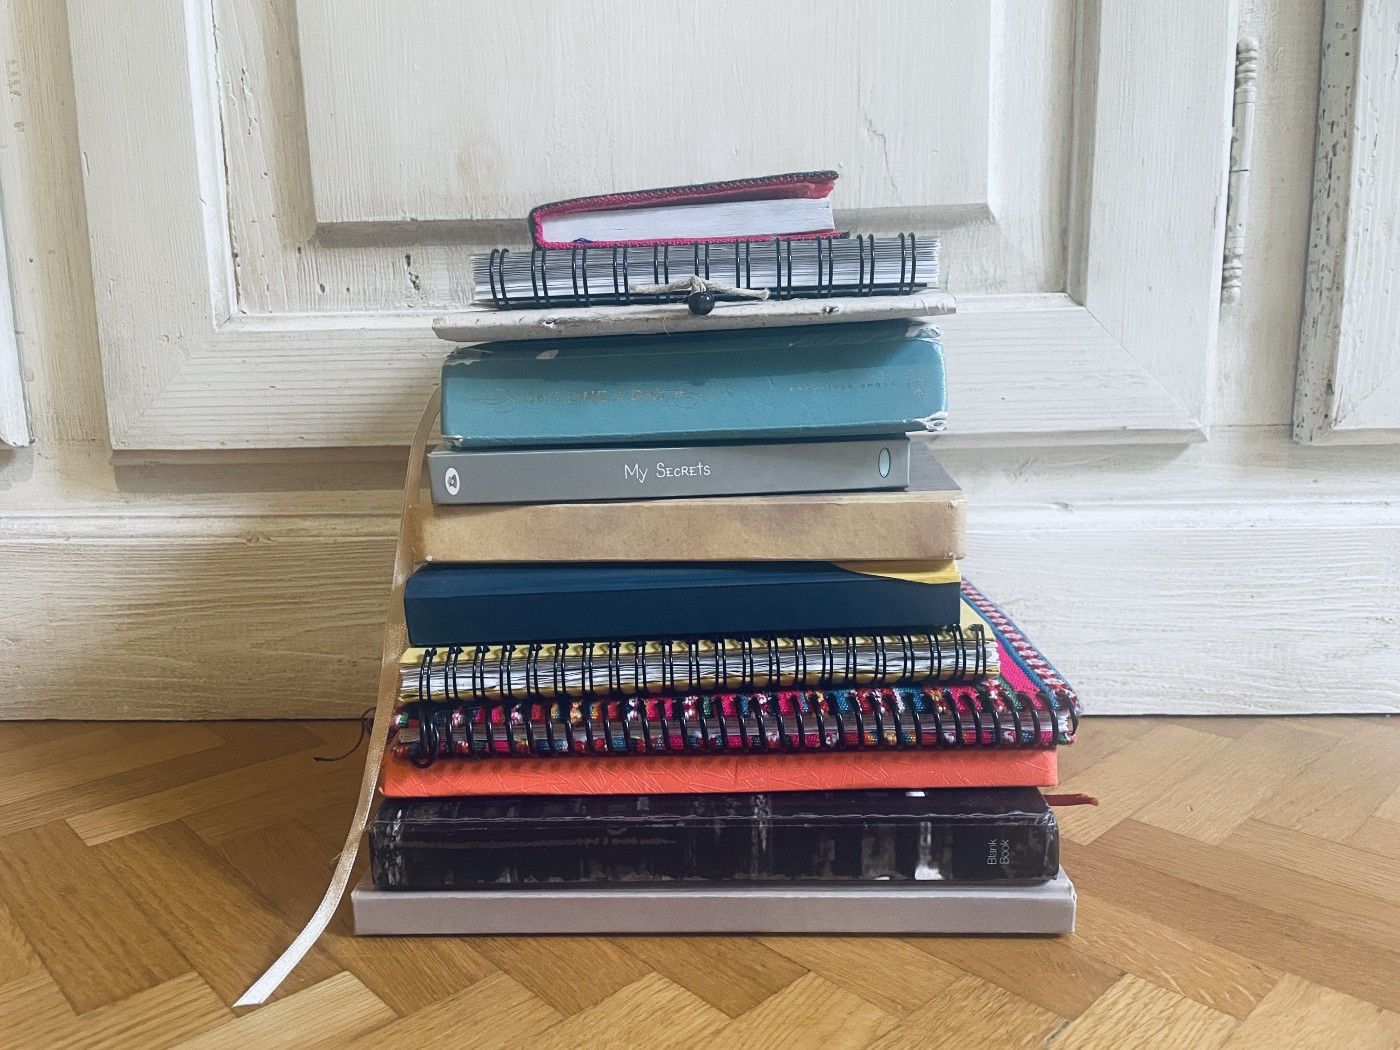 A pile of old diaries and notebooks